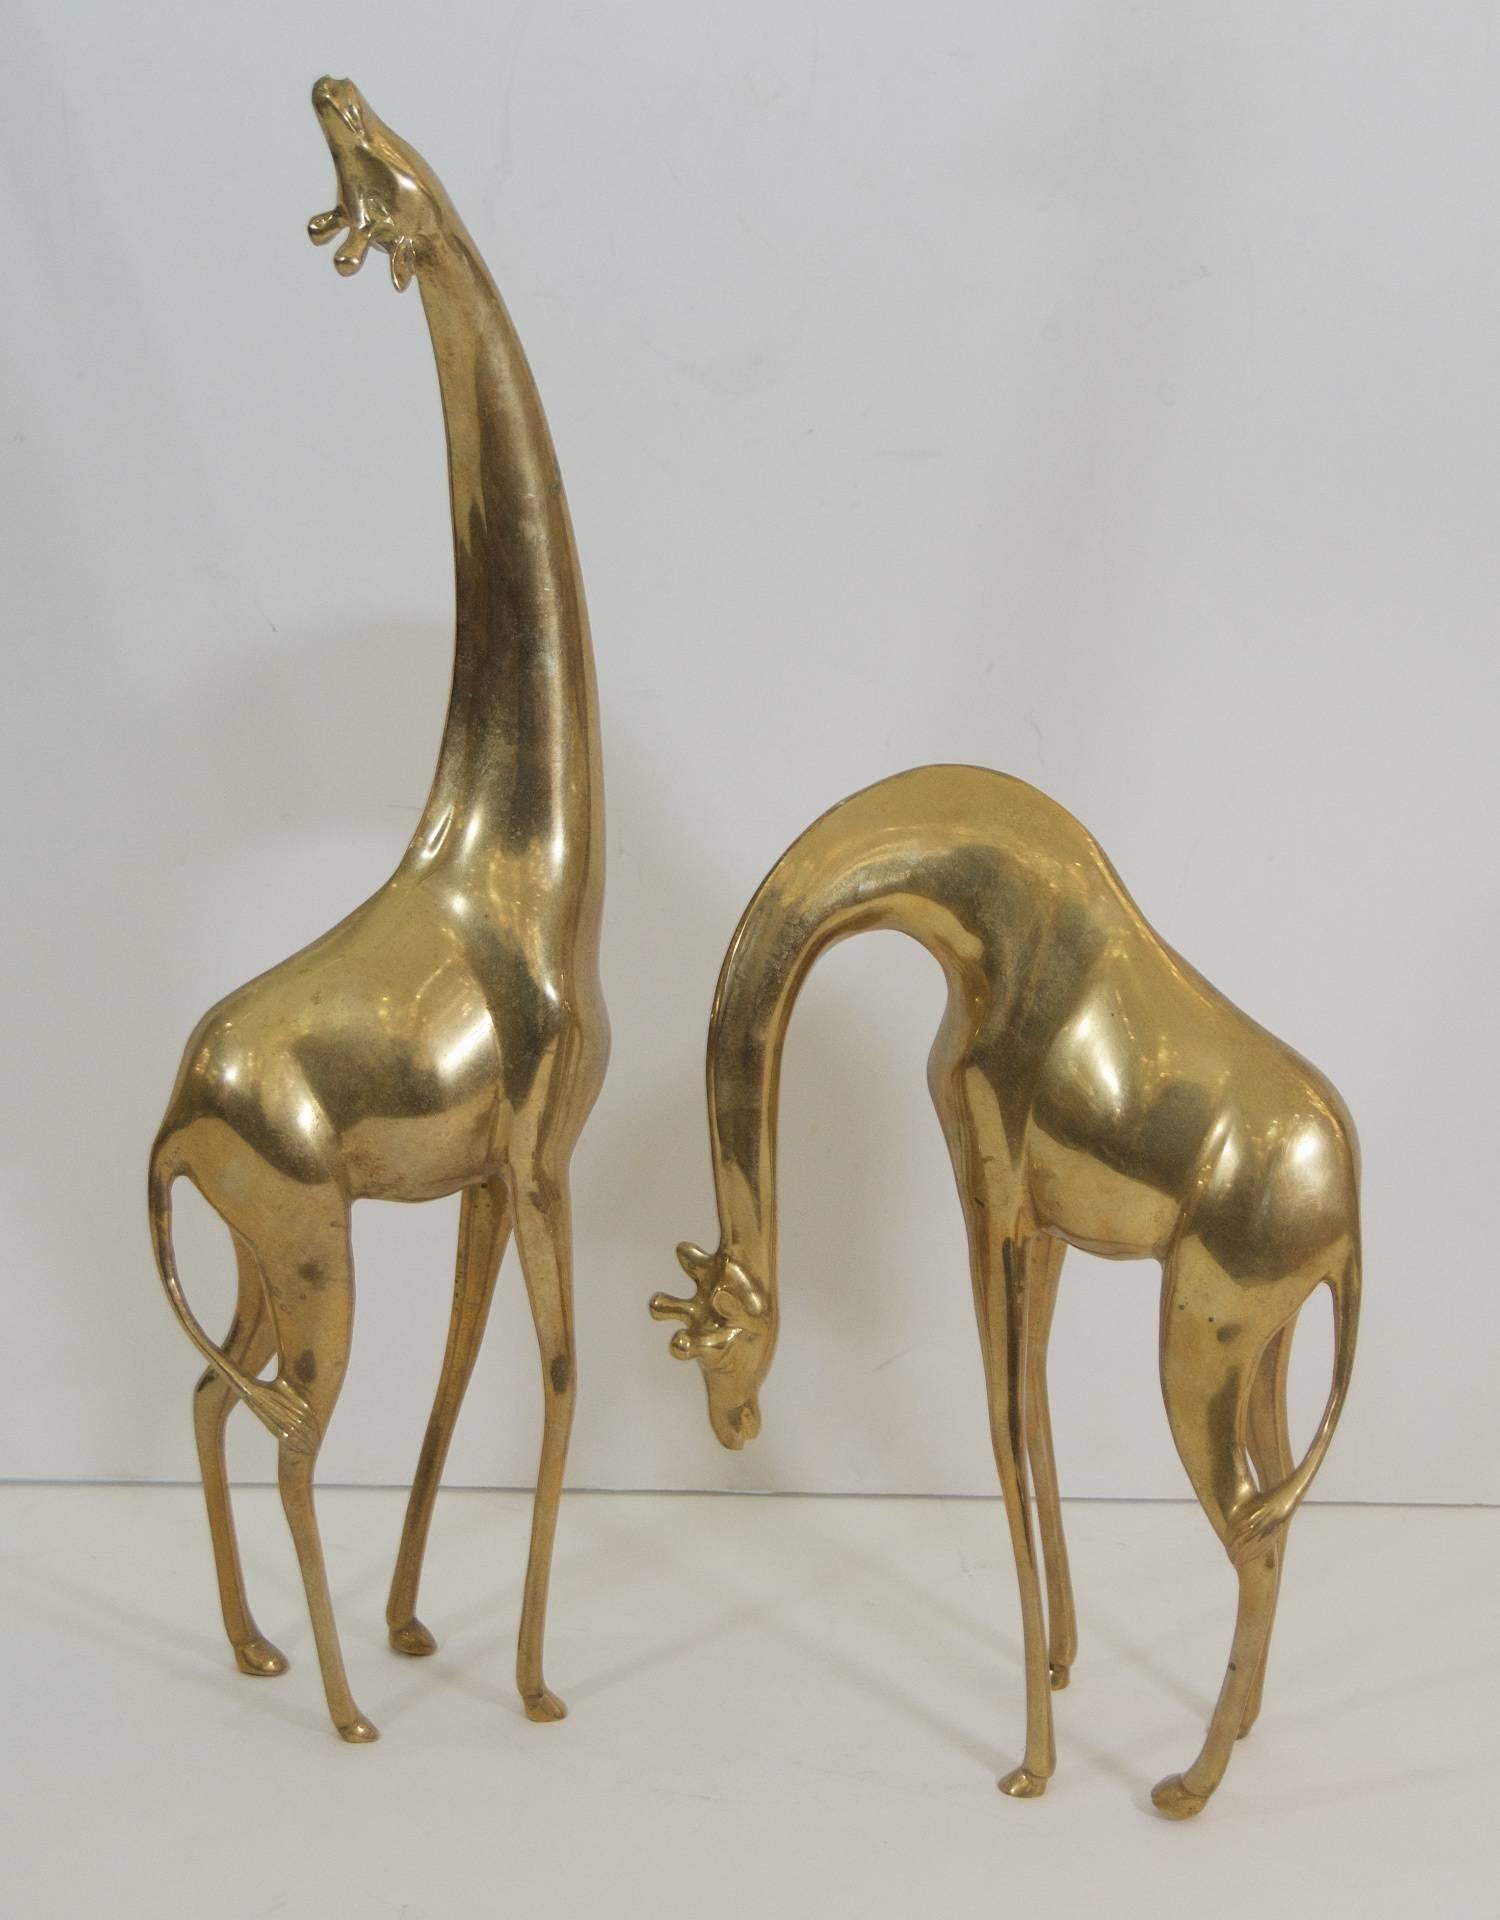 Generously sized pair of elegant giraffes in brass.

Dimensions listed are of larger giraffe.